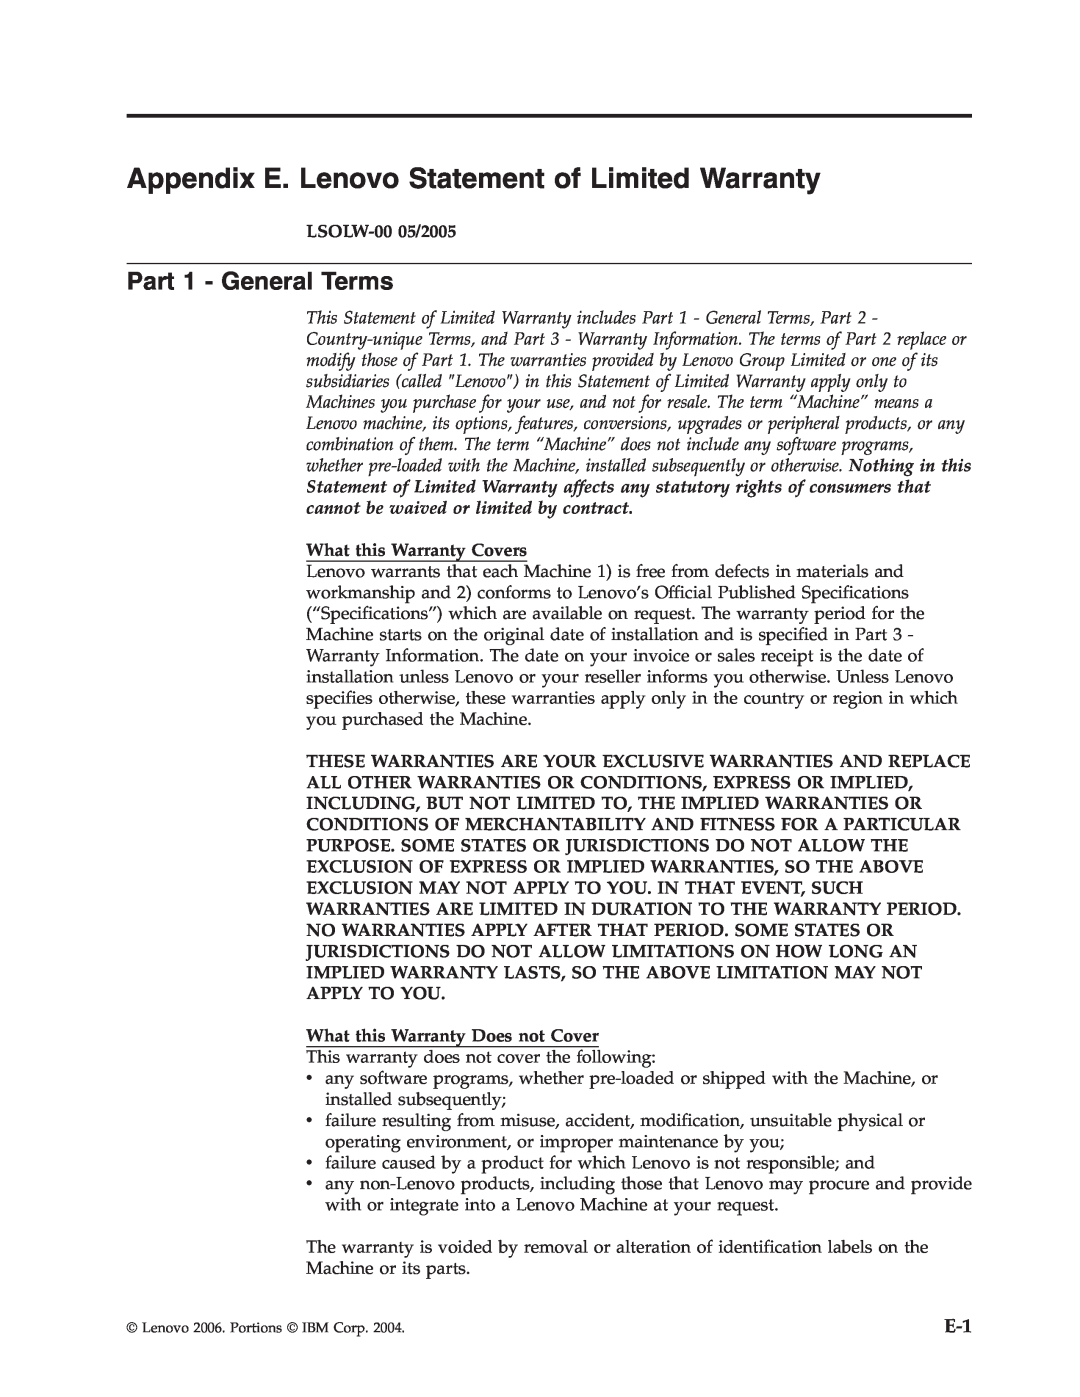 Lenovo 41N5624 manual Appendix E. Lenovo Statement of Limited Warranty, Part 1 - General Terms, LSOLW-0005/2005 